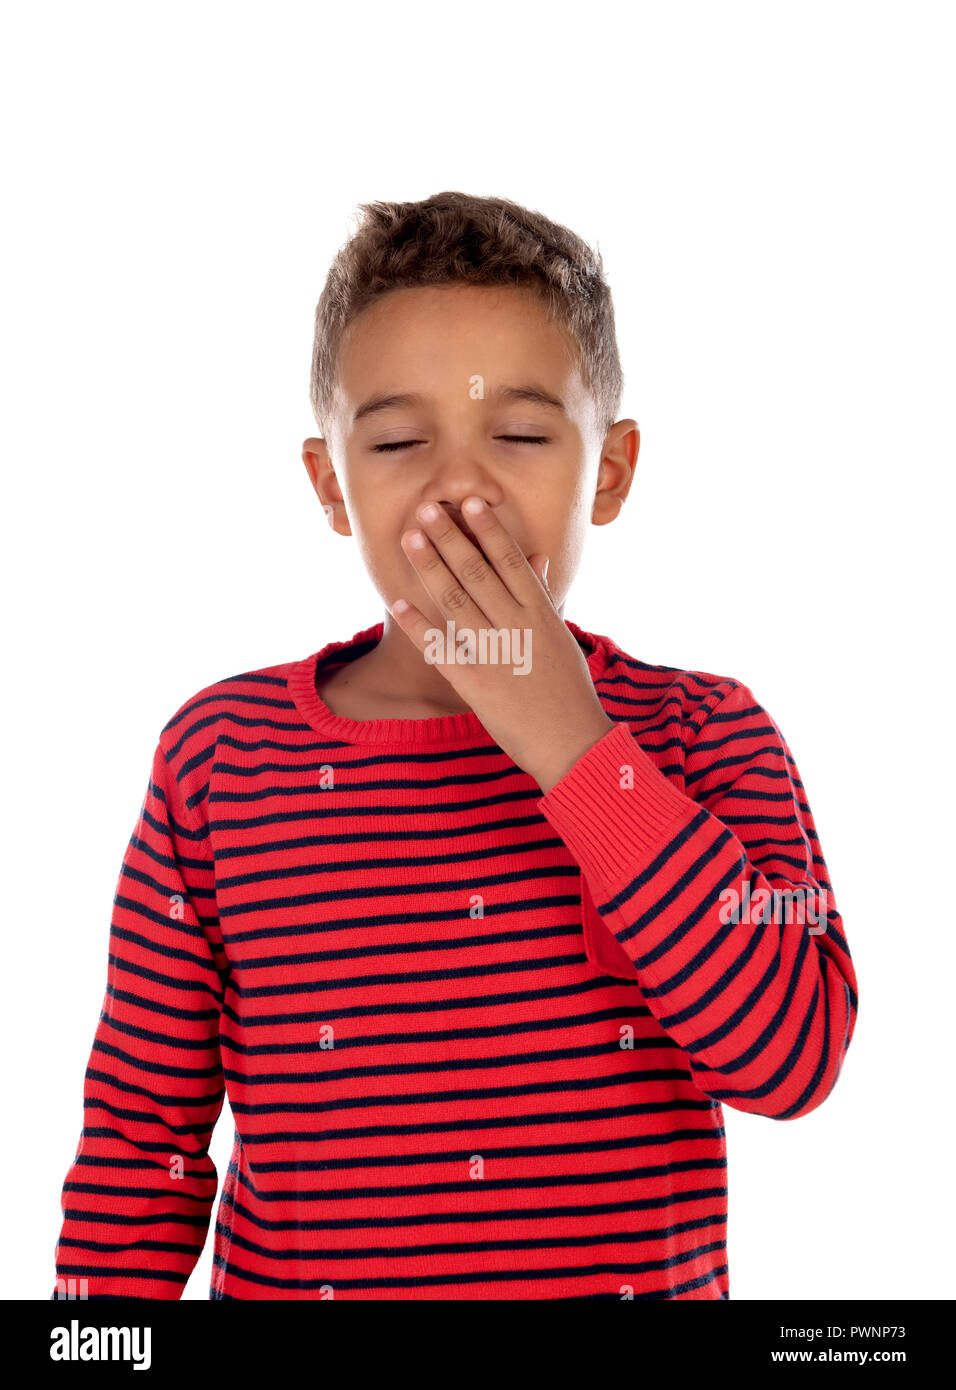 Small boy covering his mouth isolated on a white background Stock Photo